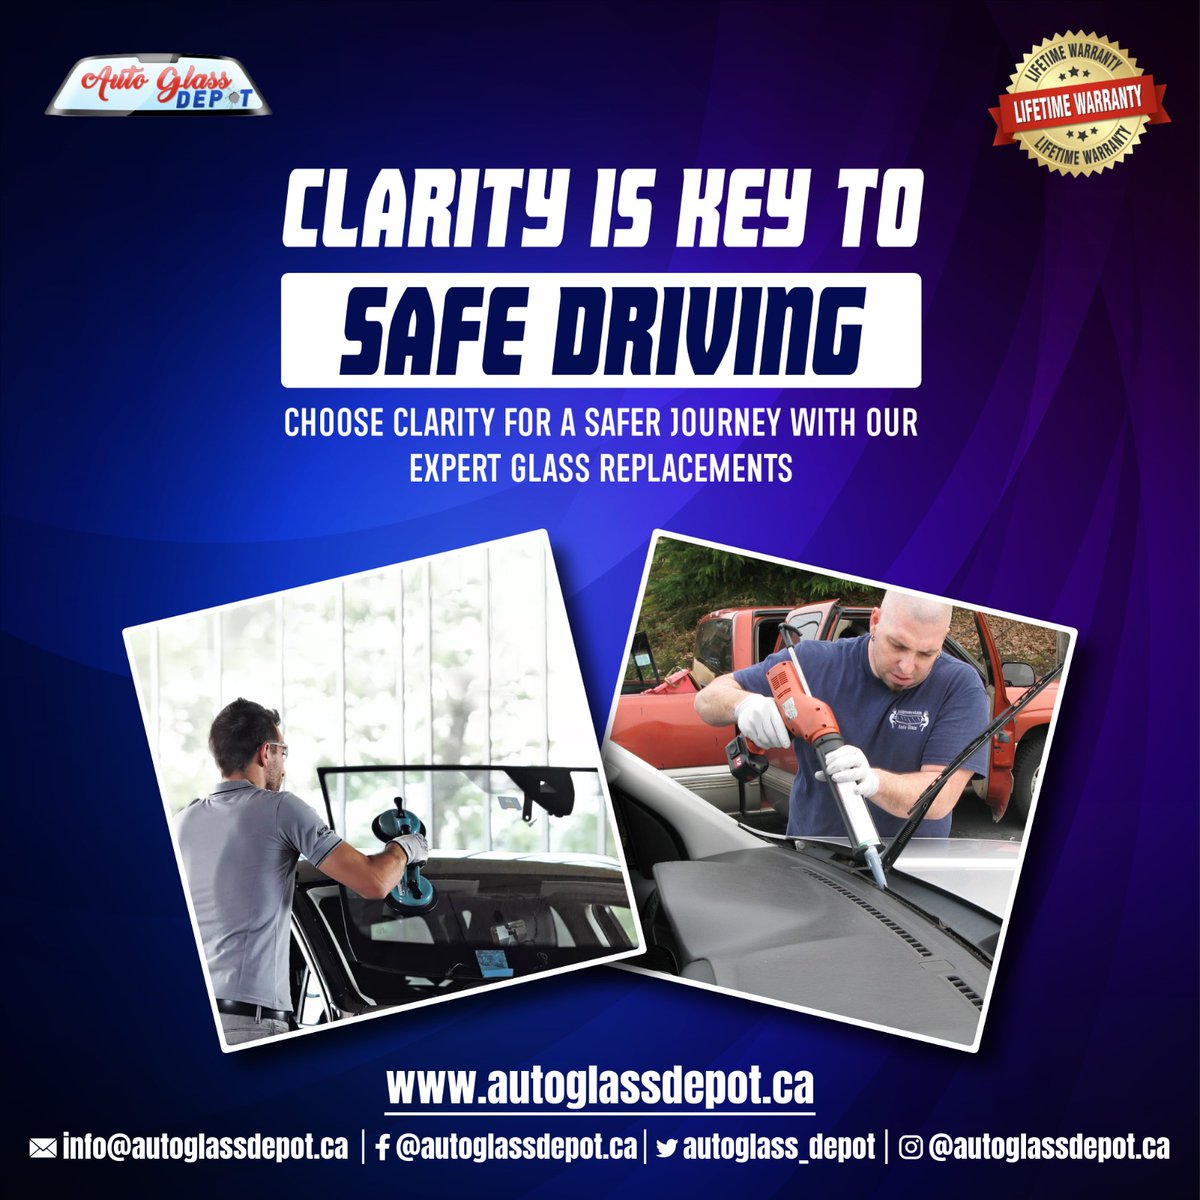 Ensure clear visibility and peace of mind on every journey with our expert auto glass services. Let's unlock safety and confidence together. #ClarityIsKey #SafeDriving #AutoGlassExperts
#windshieldwiperreplacement #windshieldreplacements #rearwindshieldreplacement